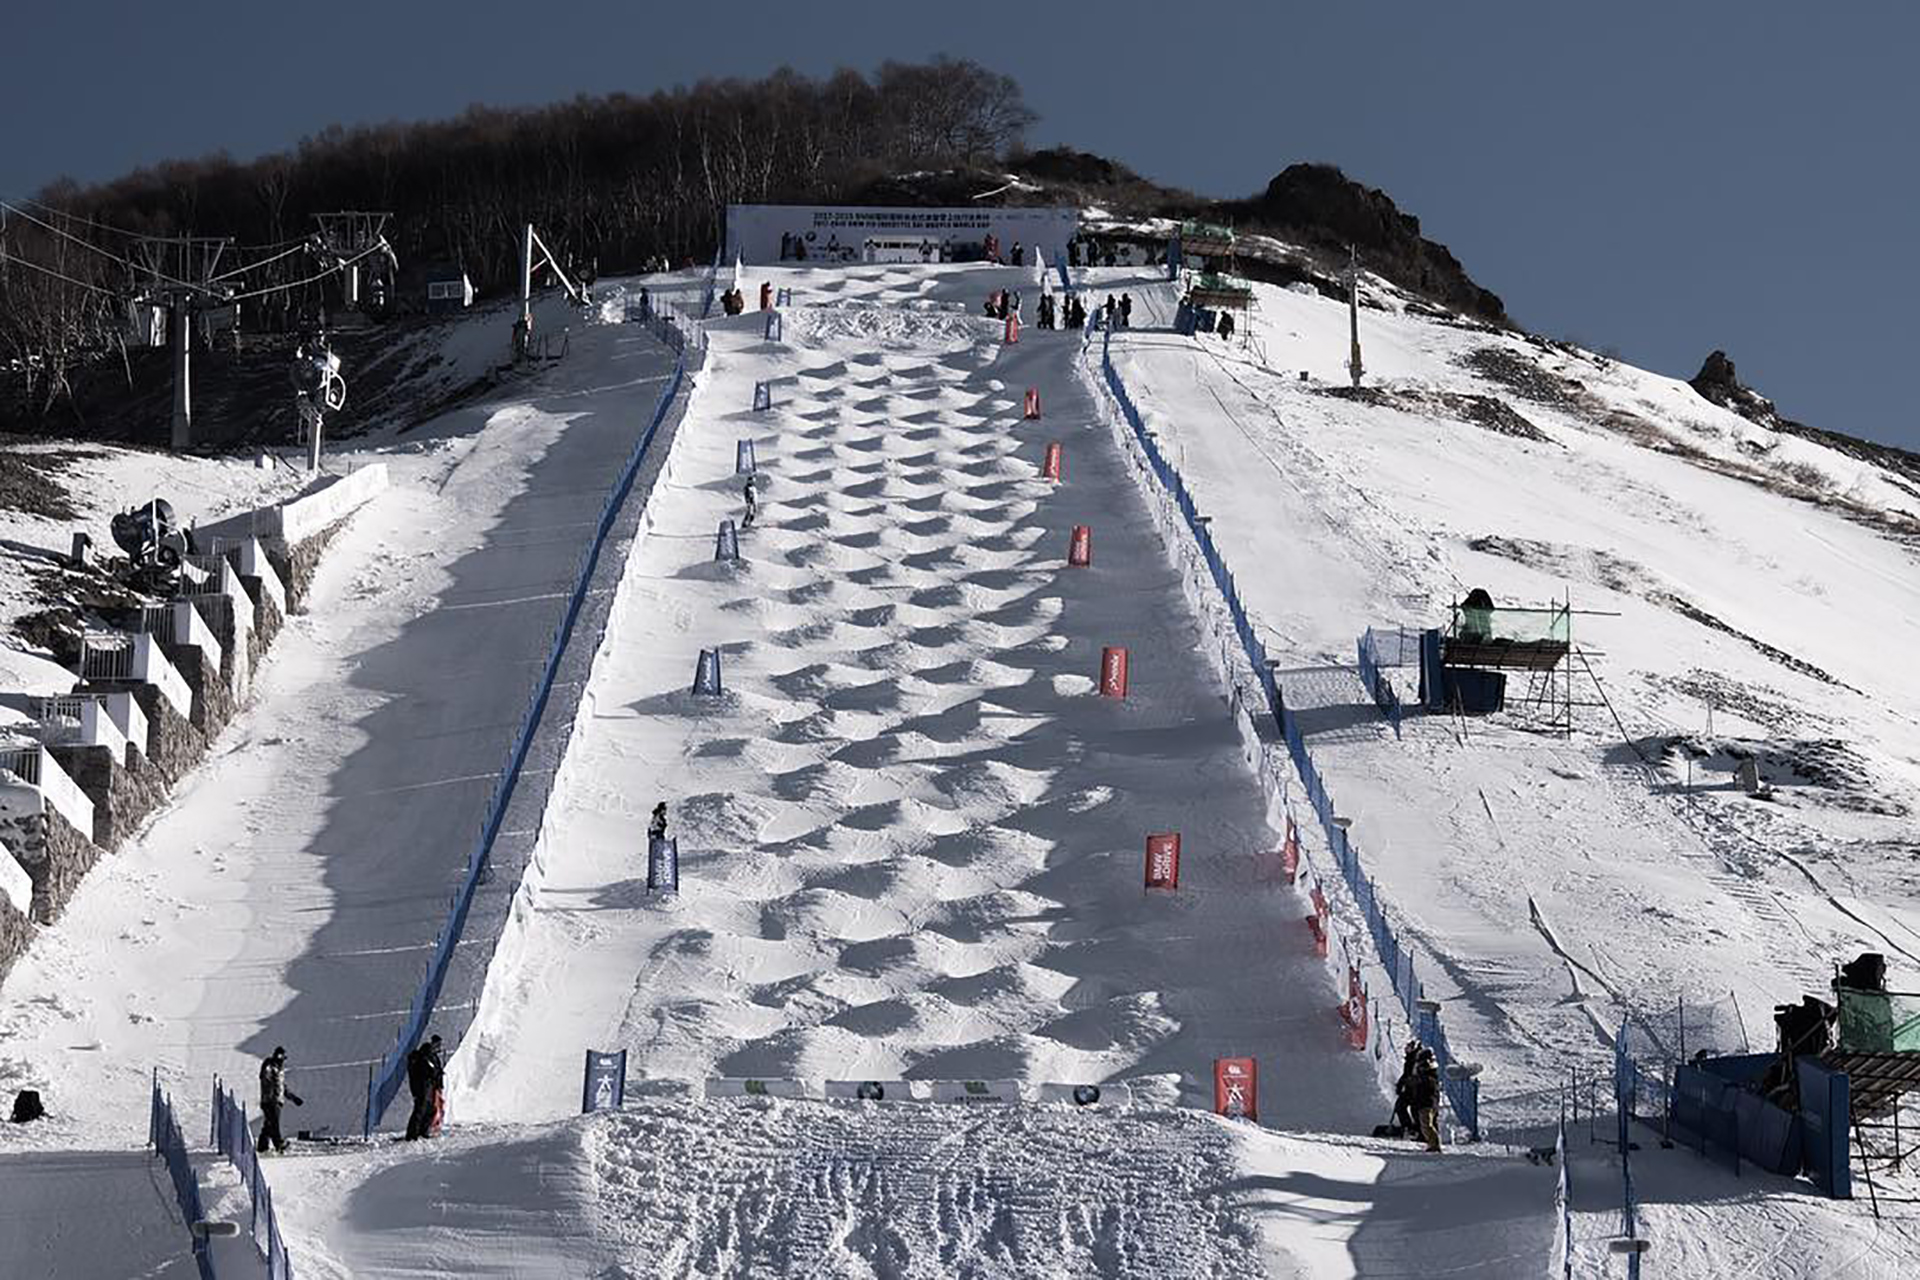 The moguls course in Thaiwoo, China